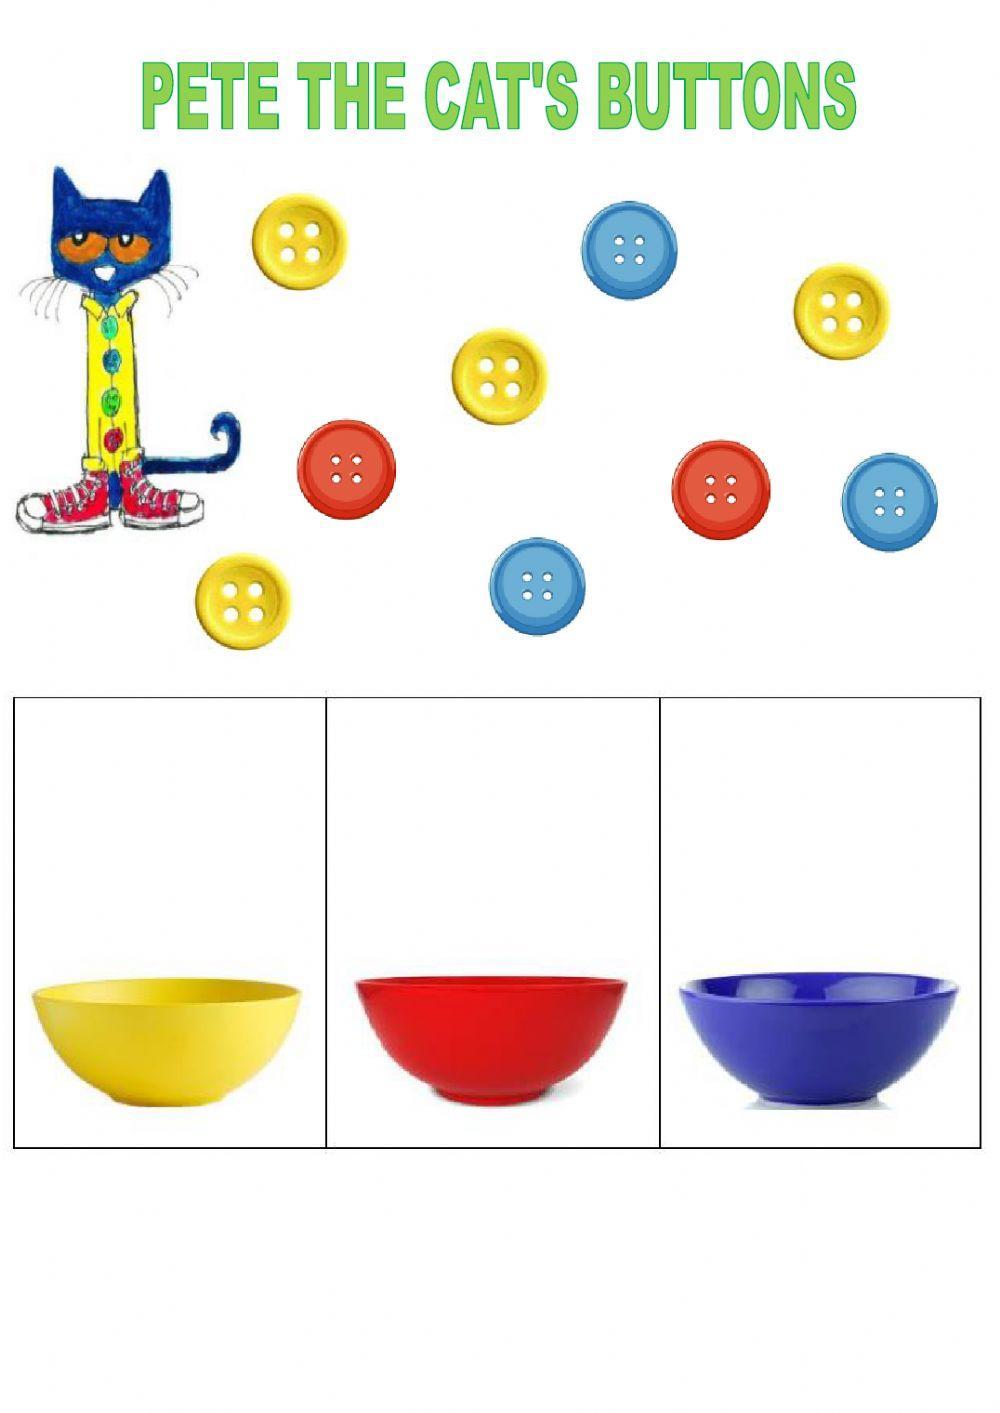 Pete the Cat's buttons